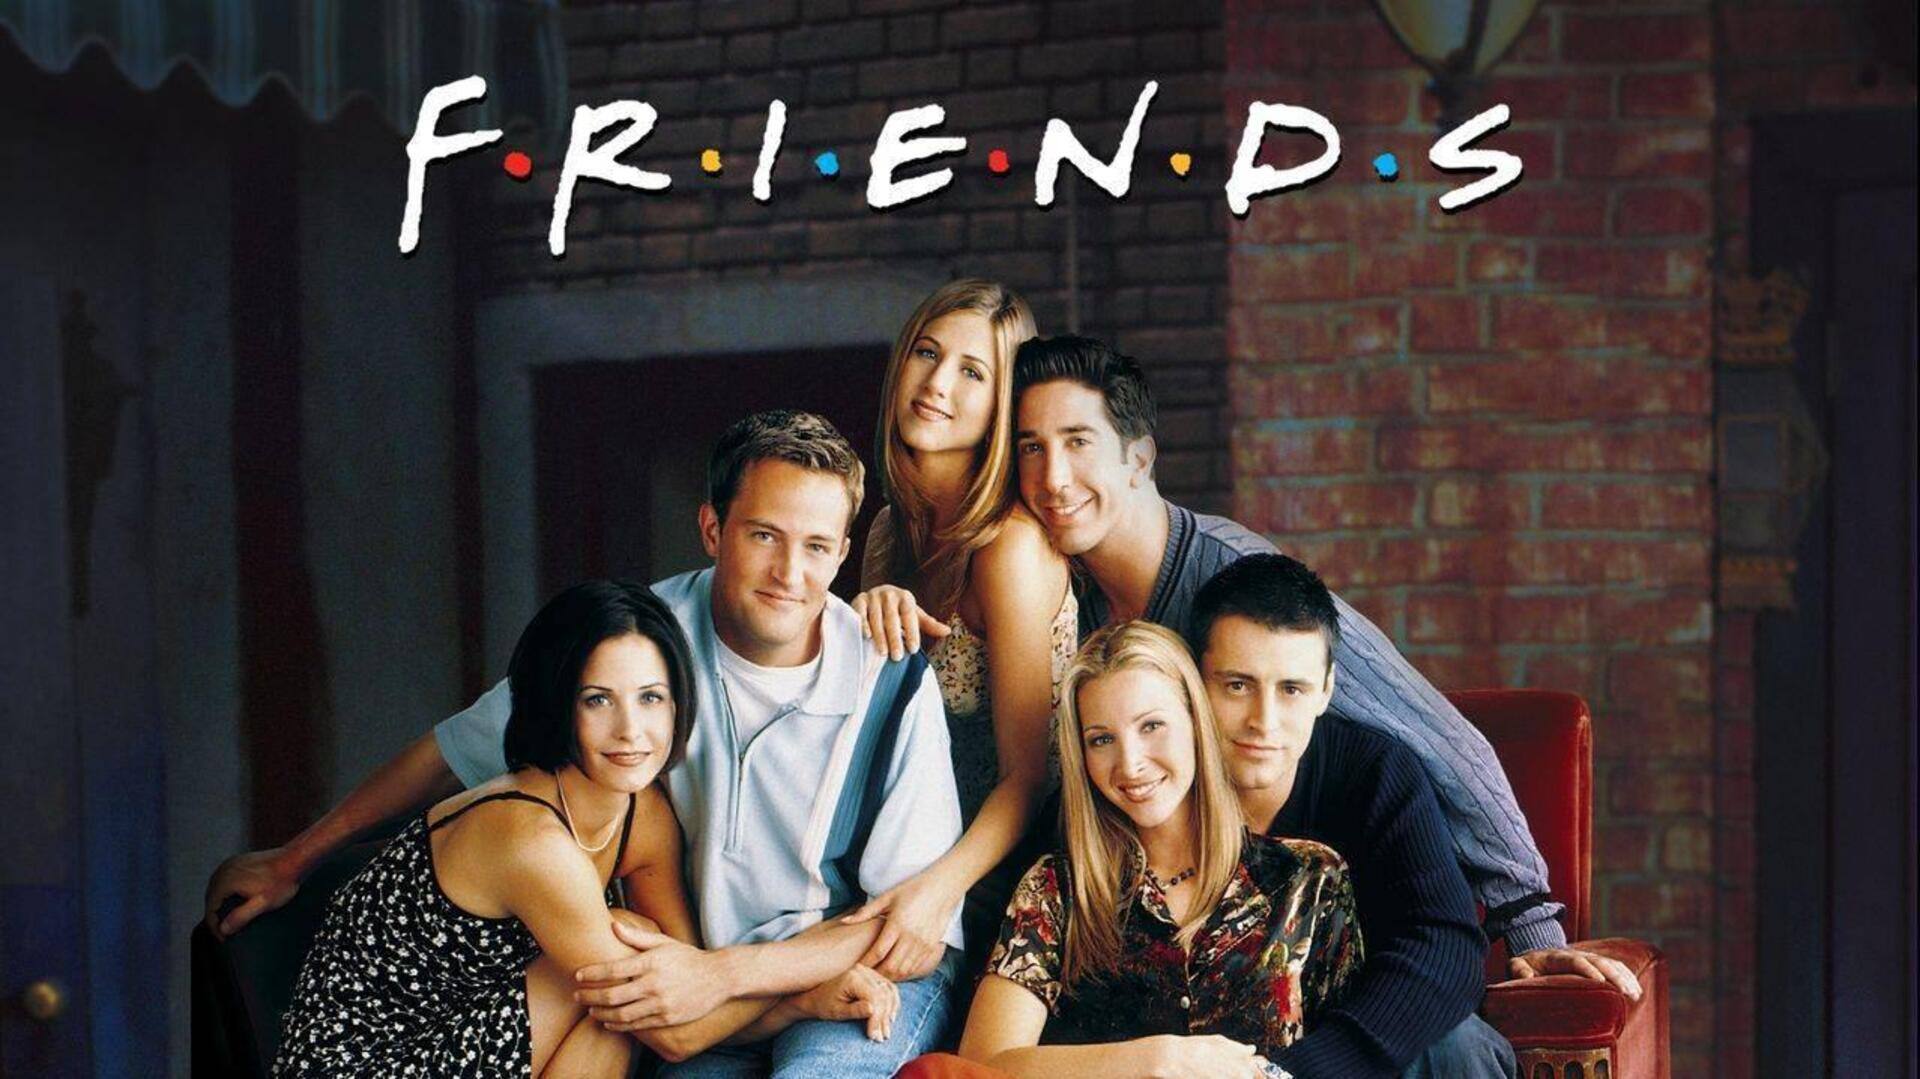 'F.R.I.E.N.D.S' viewership soars 31% after tragic demise of Matthew Perry